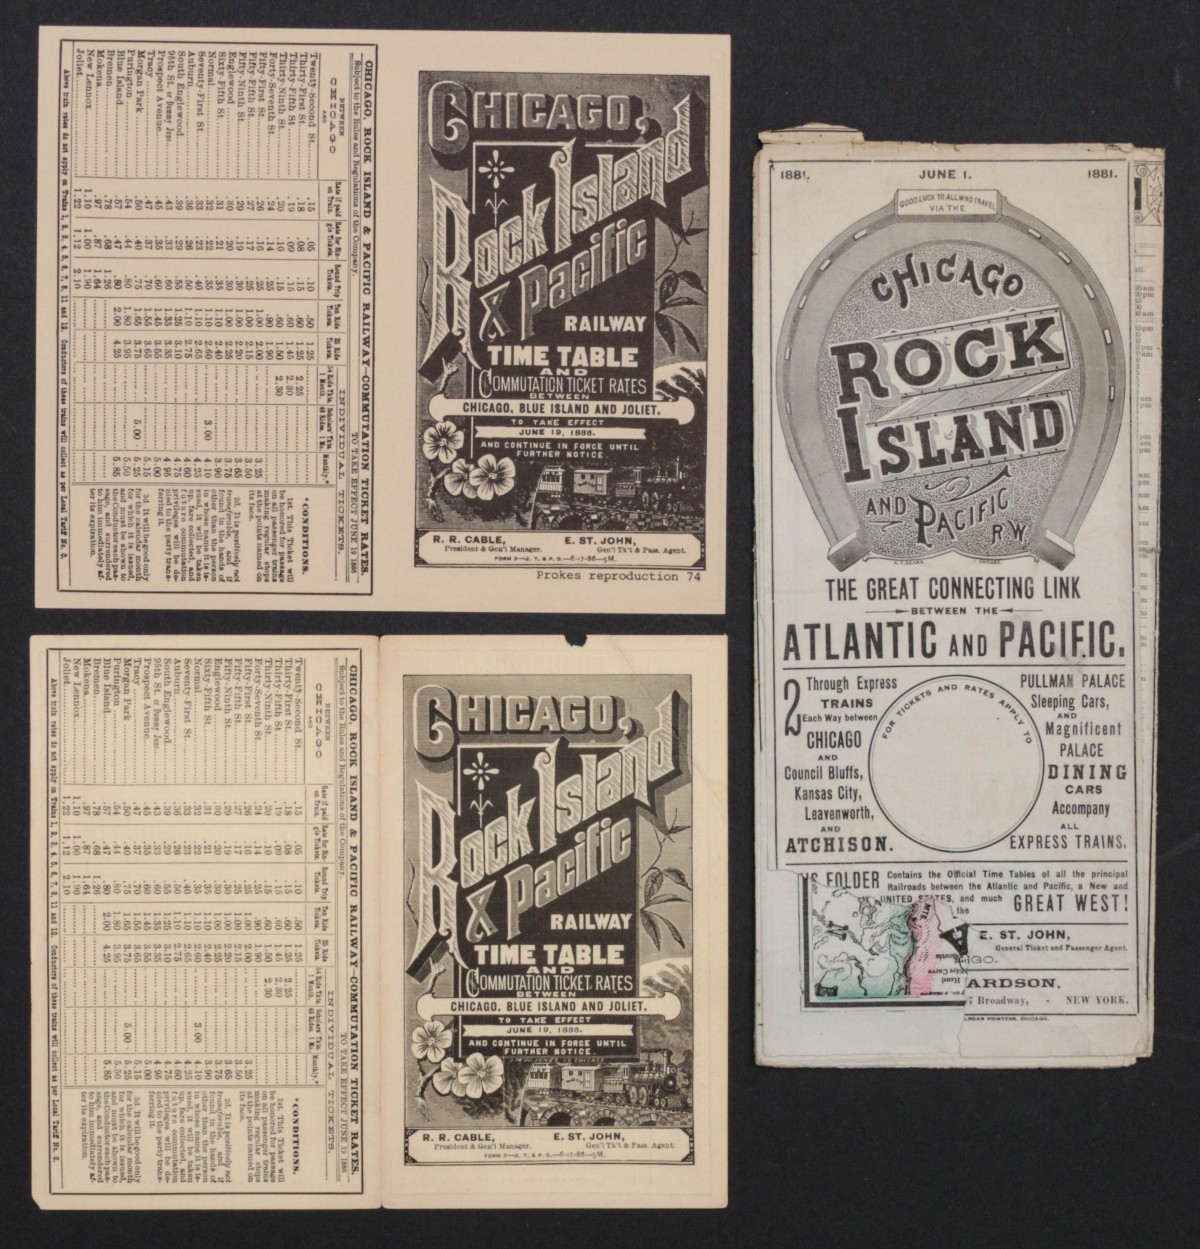 CHICAGO ROCK ISLAND & PACIFIC RR TIMETABLE FOR 1881